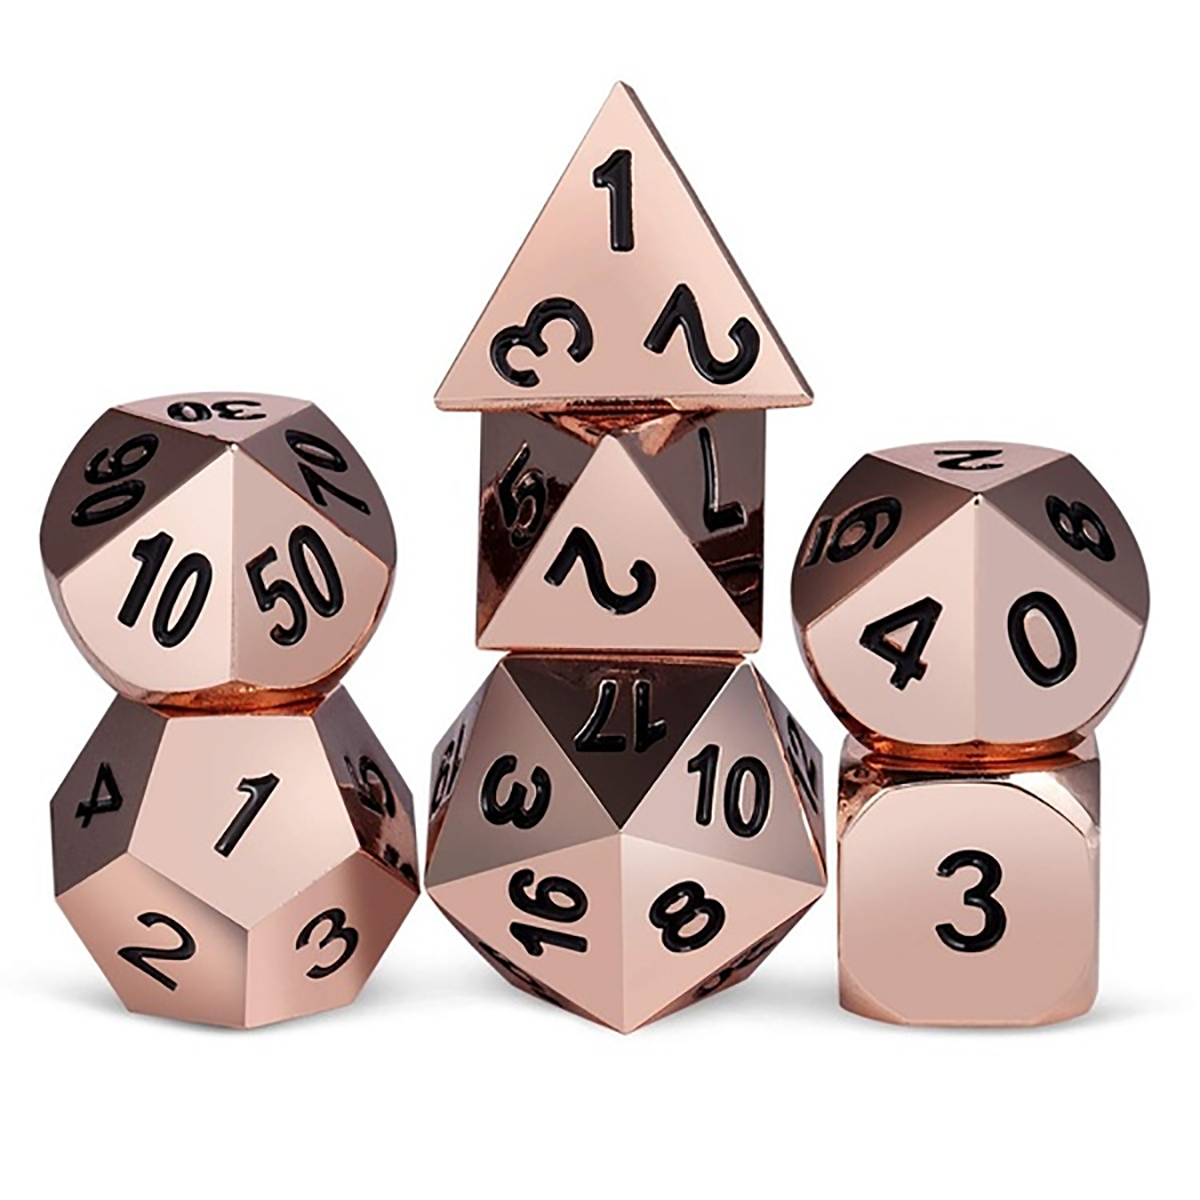 7-PcsSet-Metal-Dice-Set-Role-Playing-Dragons-Table-Game-With-Cloth-Bag-Bar-Party-Game-Dice-1677684-5